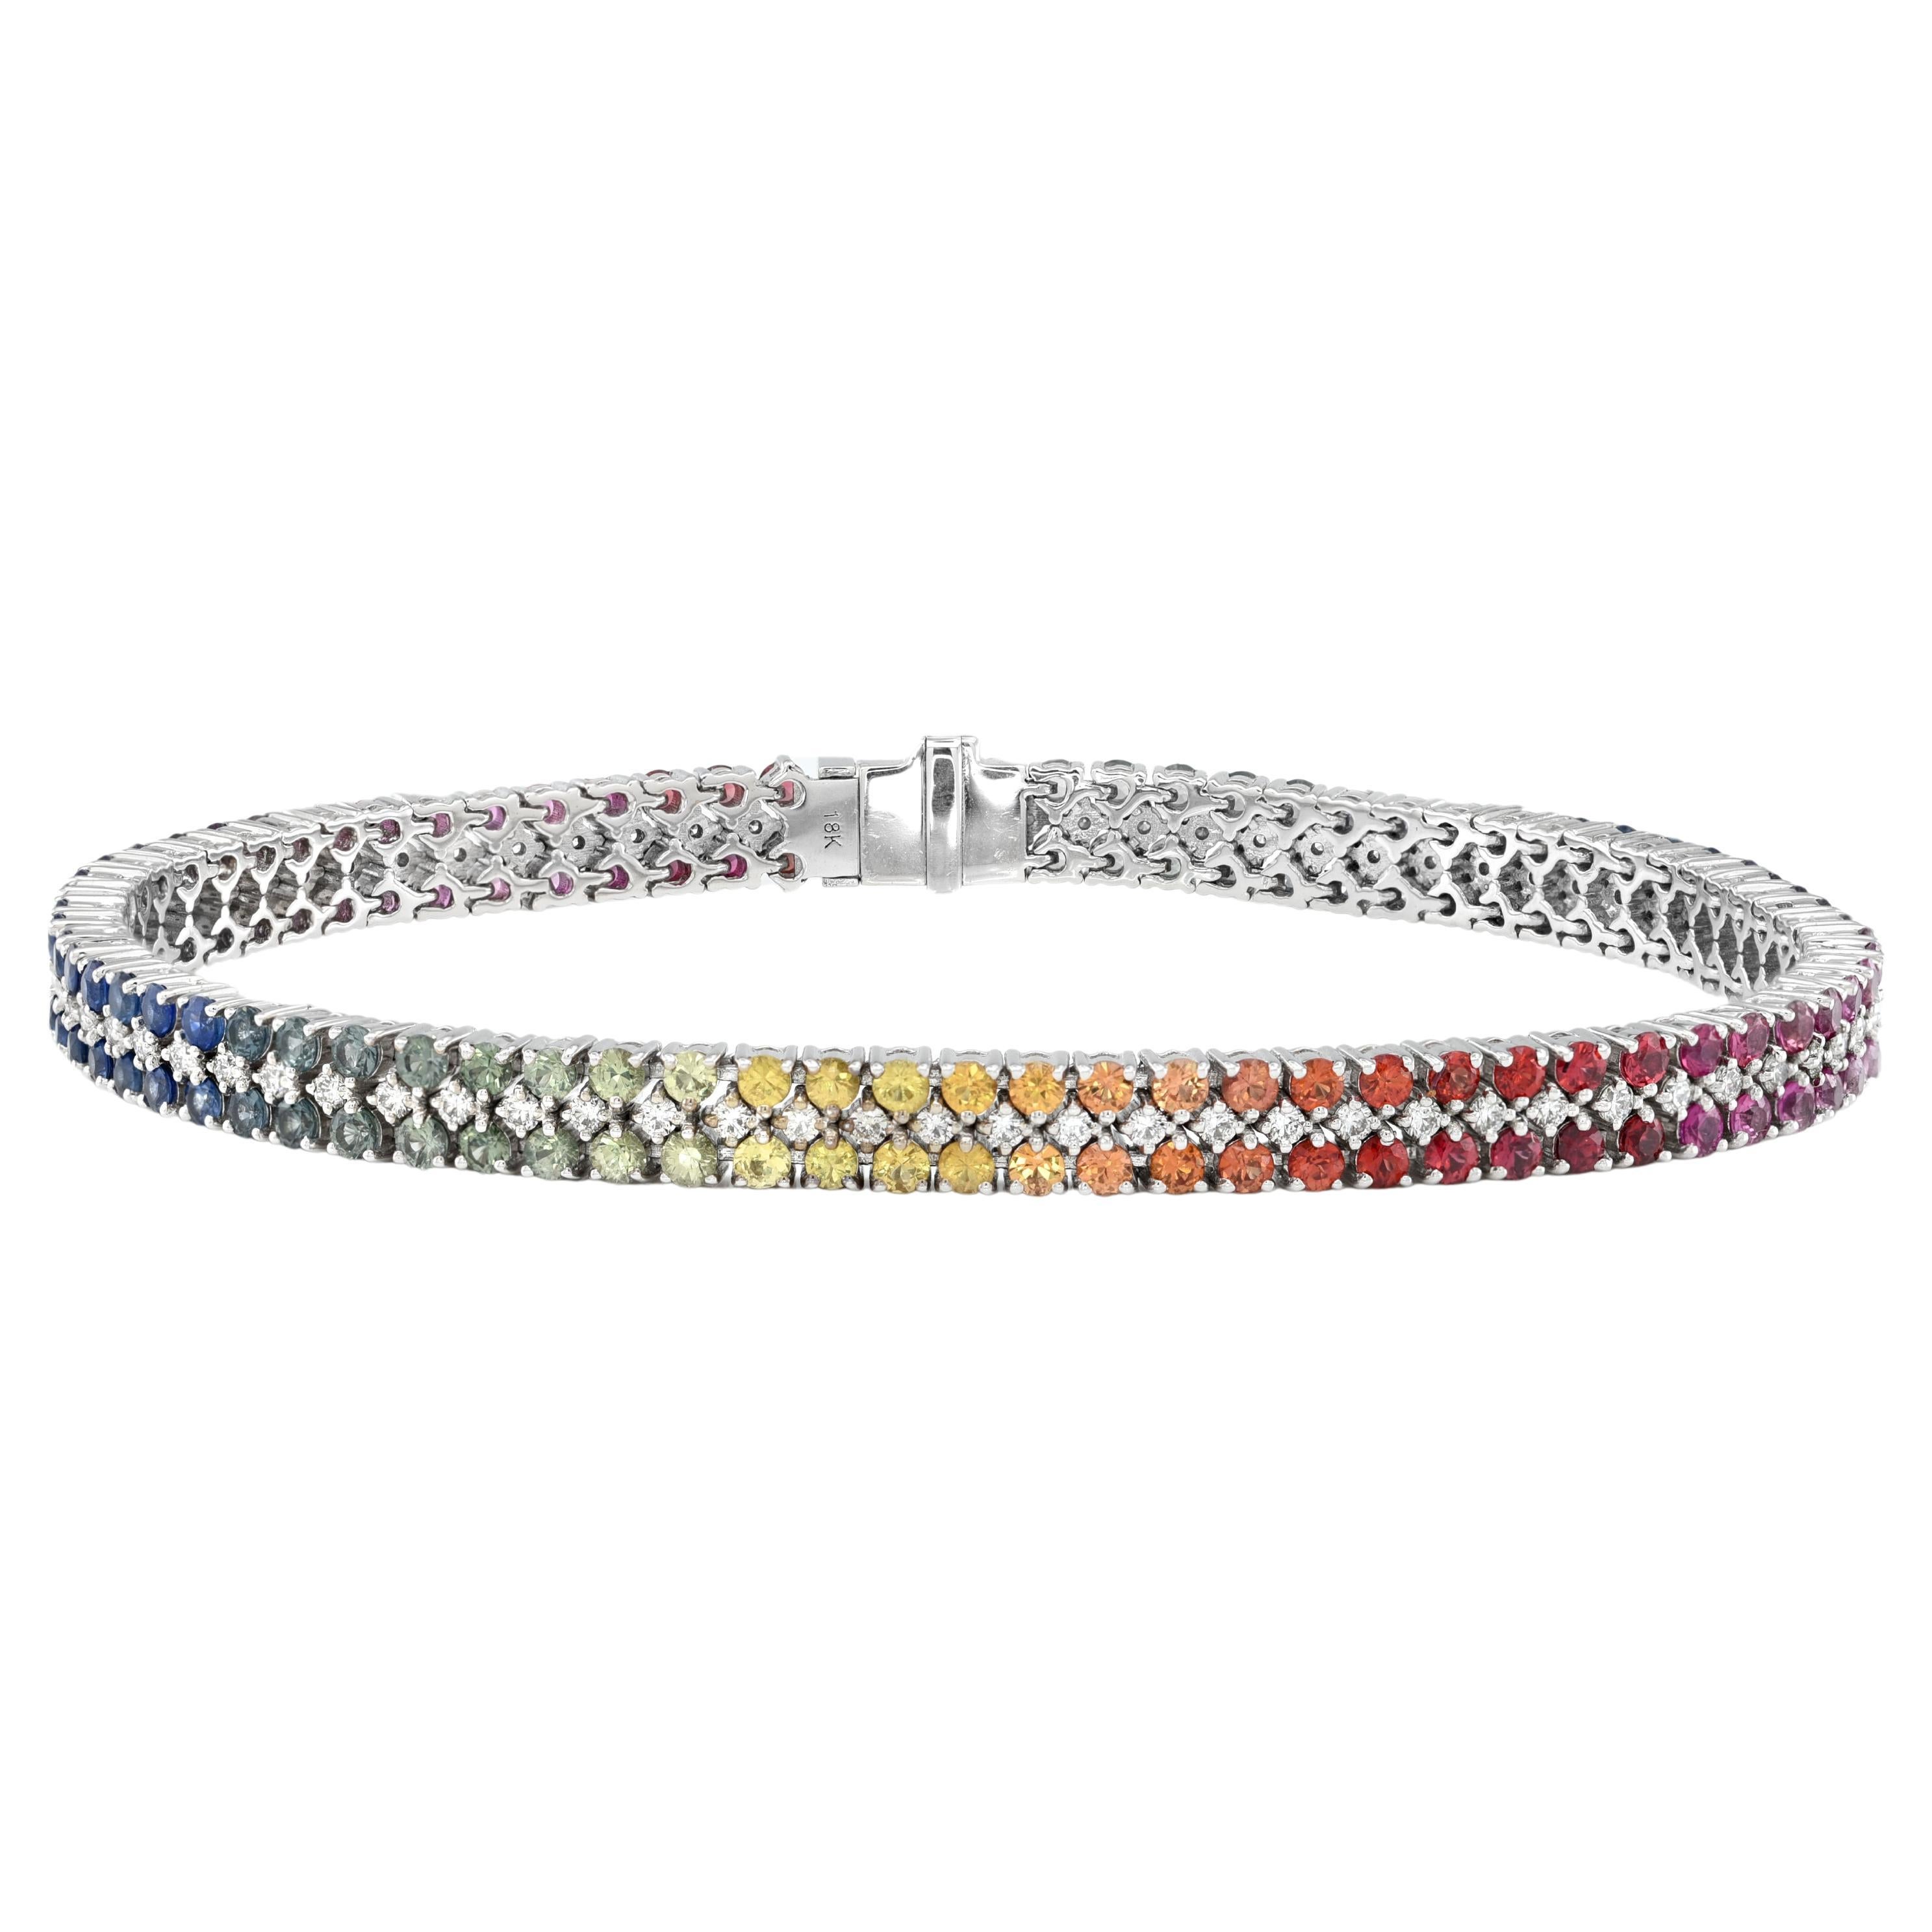 5.45 Carats Rainbow Color Sapphires with Diamonds in 18K White Gold Bracelet